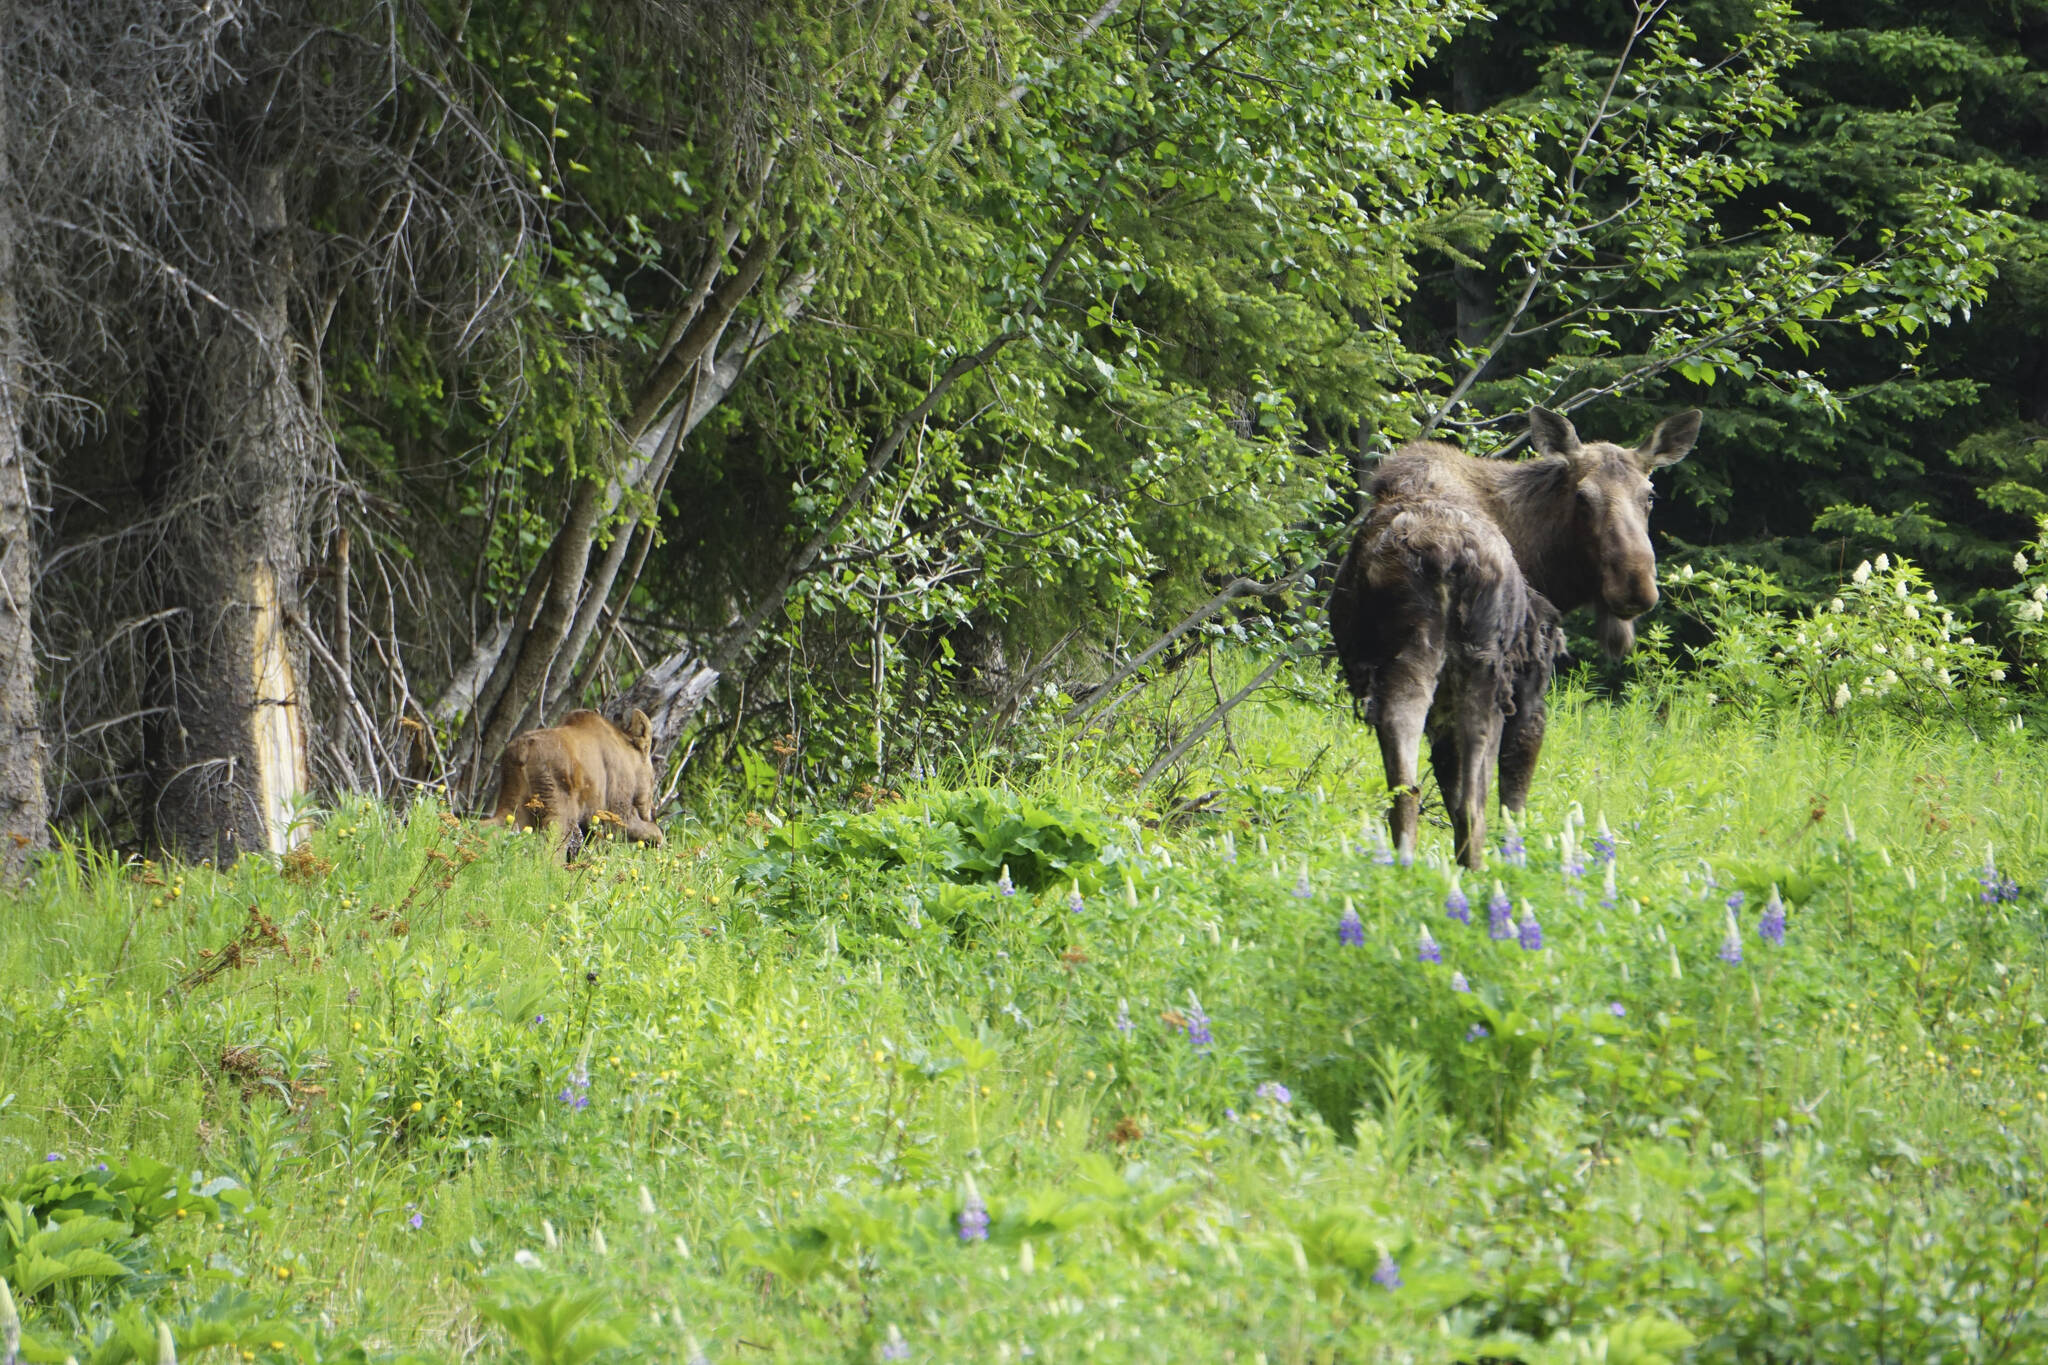 A cow moose looks out for her calf on Monday morning, June 6, 2022, on Diamond Ridge near Homer, Alaska. (Photo by Michael Armstrong/Homer News)